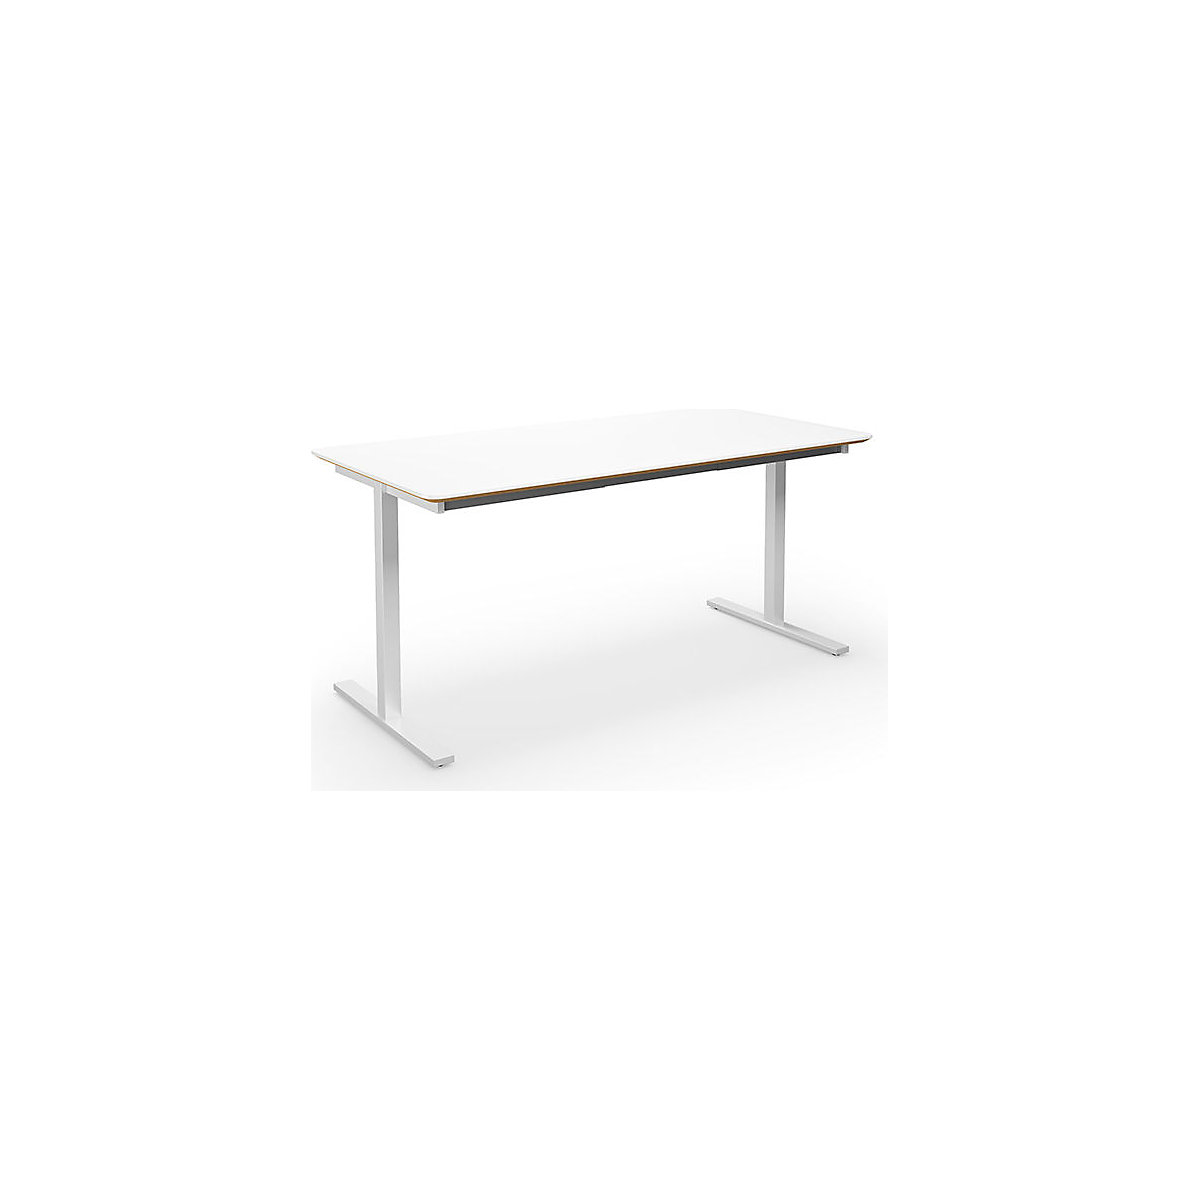 DUO-T Trend multi-purpose desk, straight tabletop, rounded corners, WxD 1400 x 800 mm, white, white-4